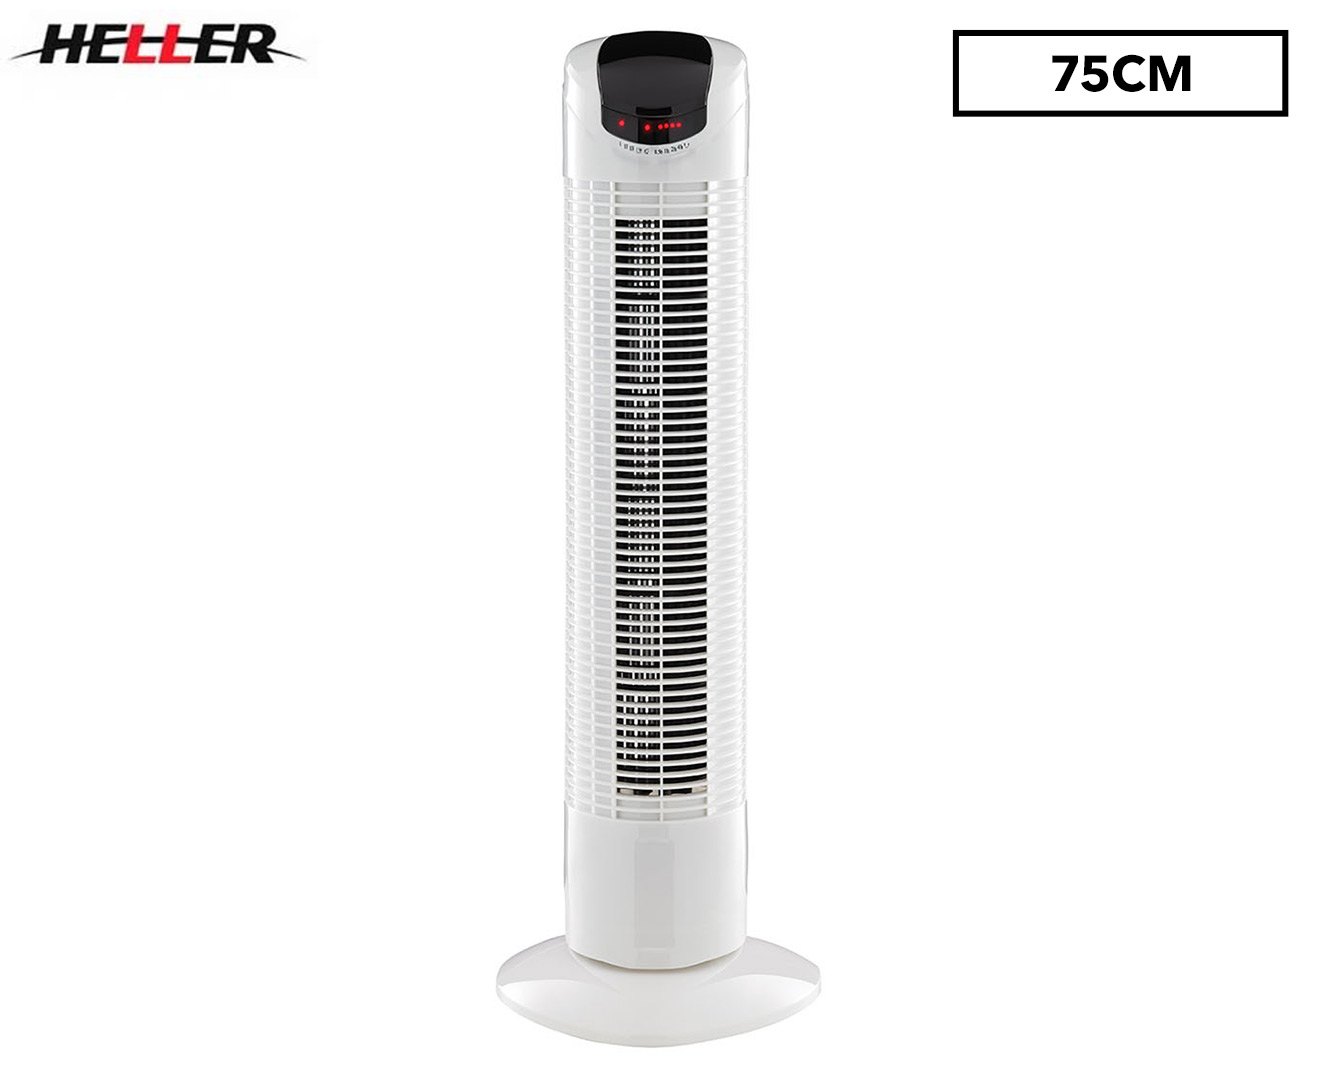 Heller 75cm Tower Fan with size 1320 X 1080